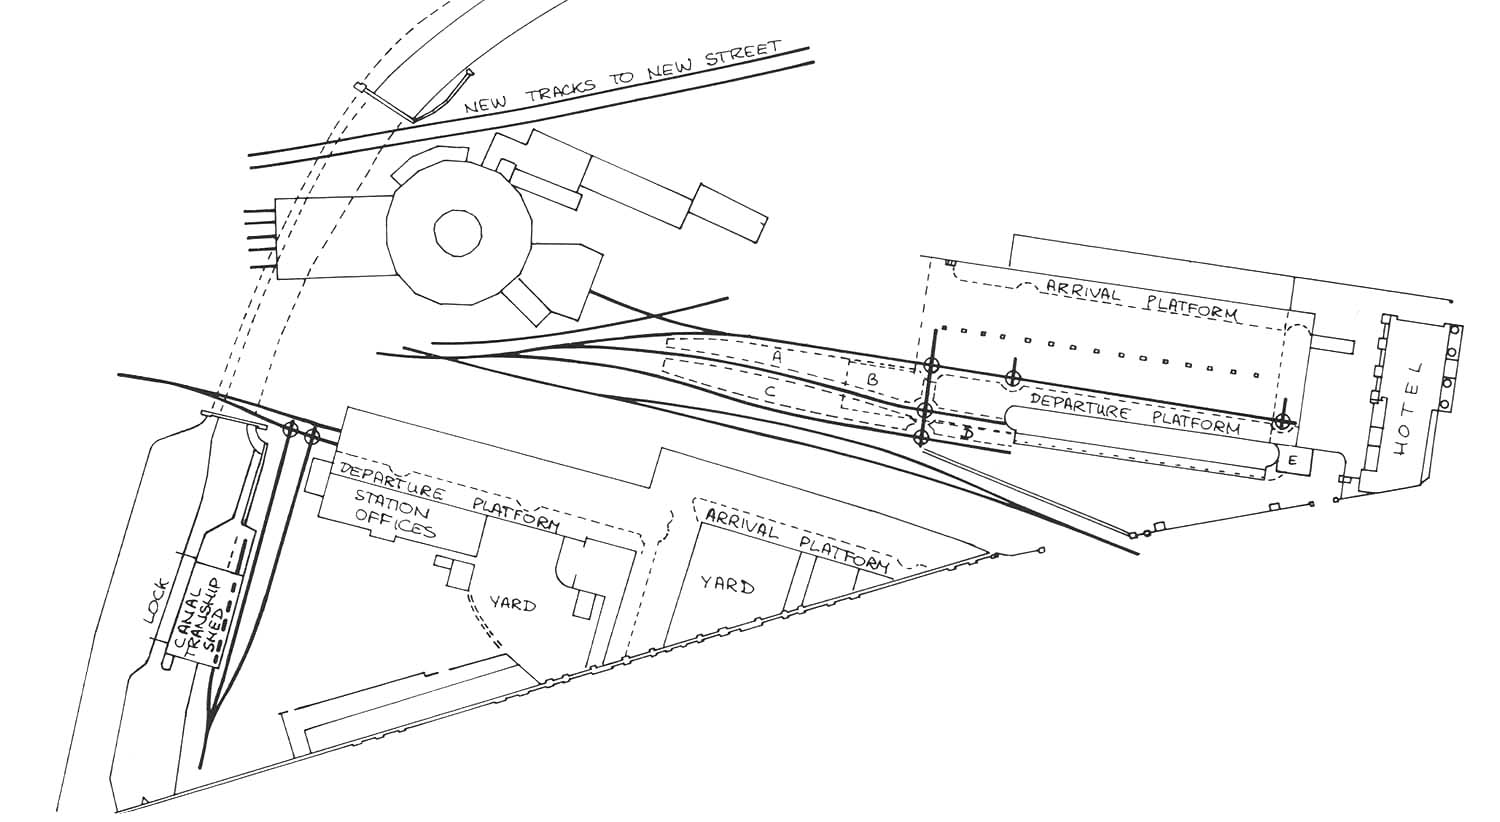 Plan of the approach and layout of Curzon Street station's train shed and its Engine House as seen in 1852